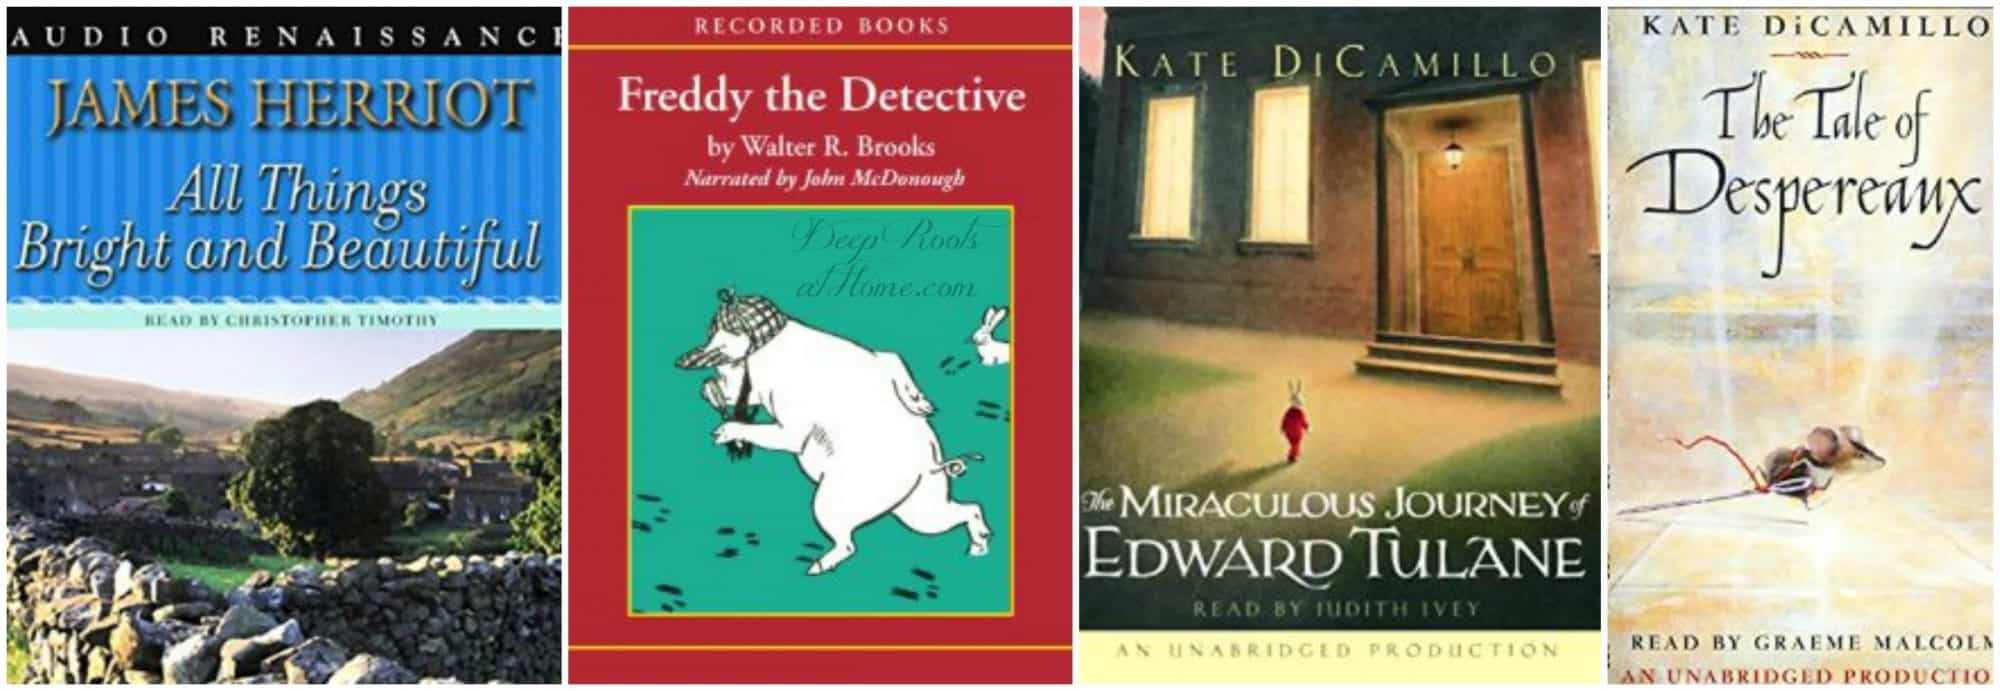 4 audiobooks including The Miraculous Journey of Edward Tulane, Kate DiCamillo